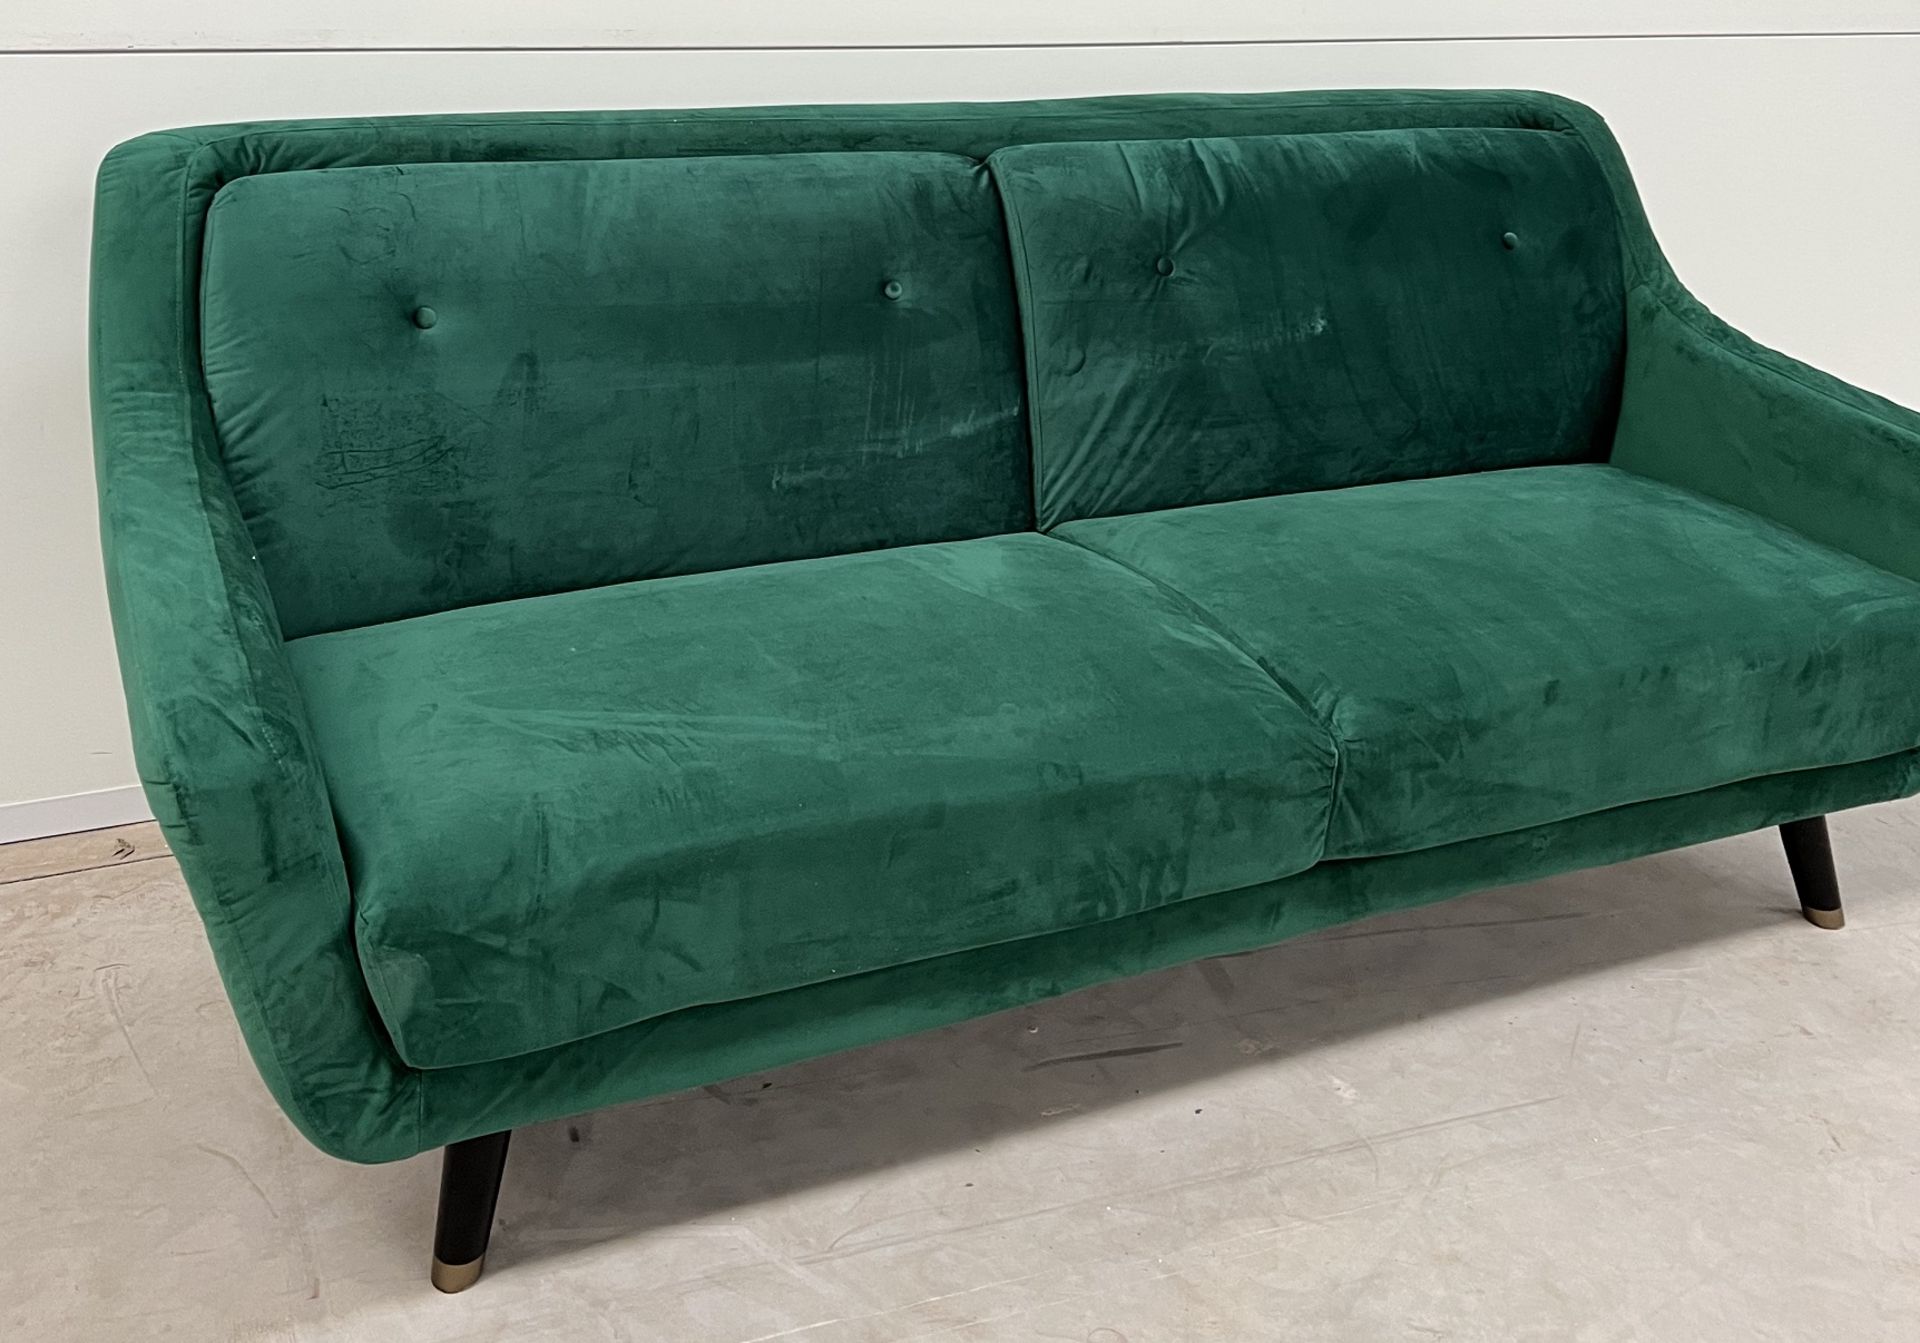 Lance Three Seater Sofa In Green Velvet Legs Finished In Black Legs This Welcoming Shape Is Hugged - Image 2 of 4